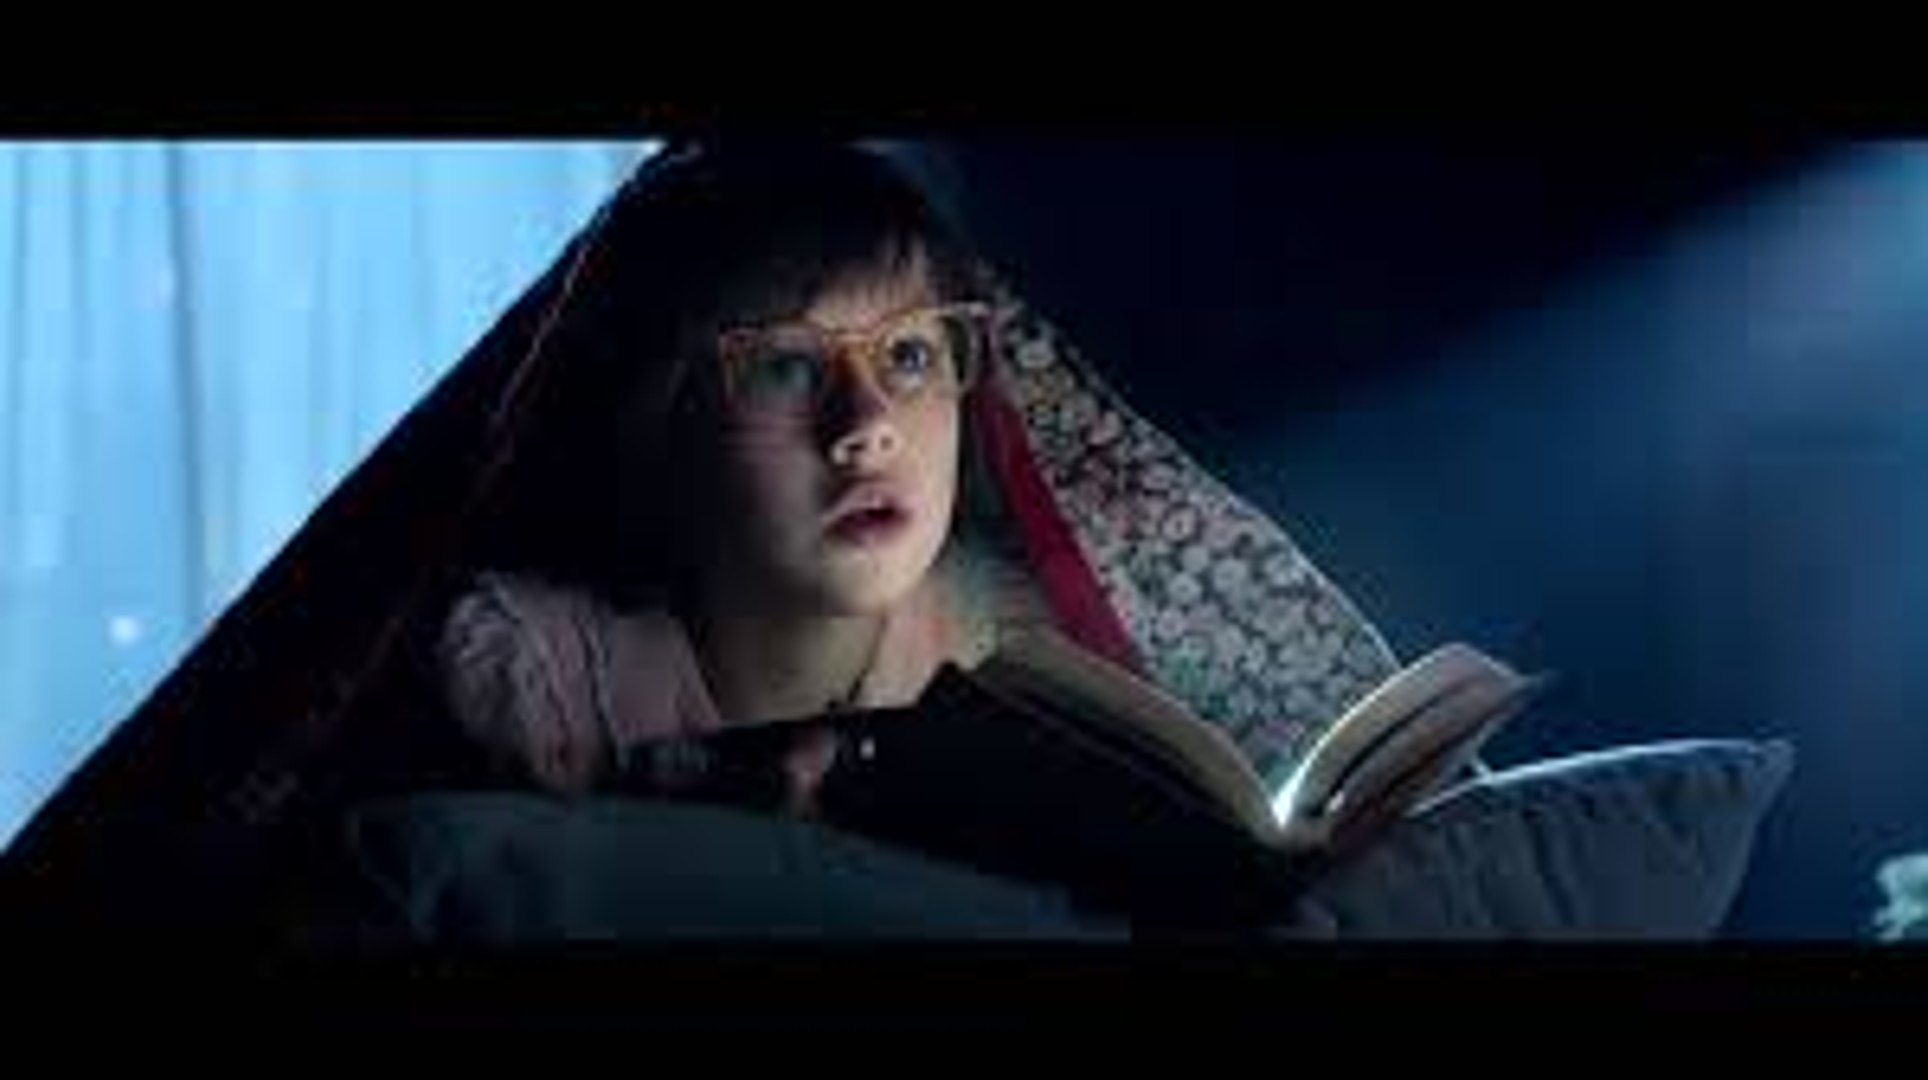 The Bfg Theatrical Trailer Full Hd Video Dailymotion